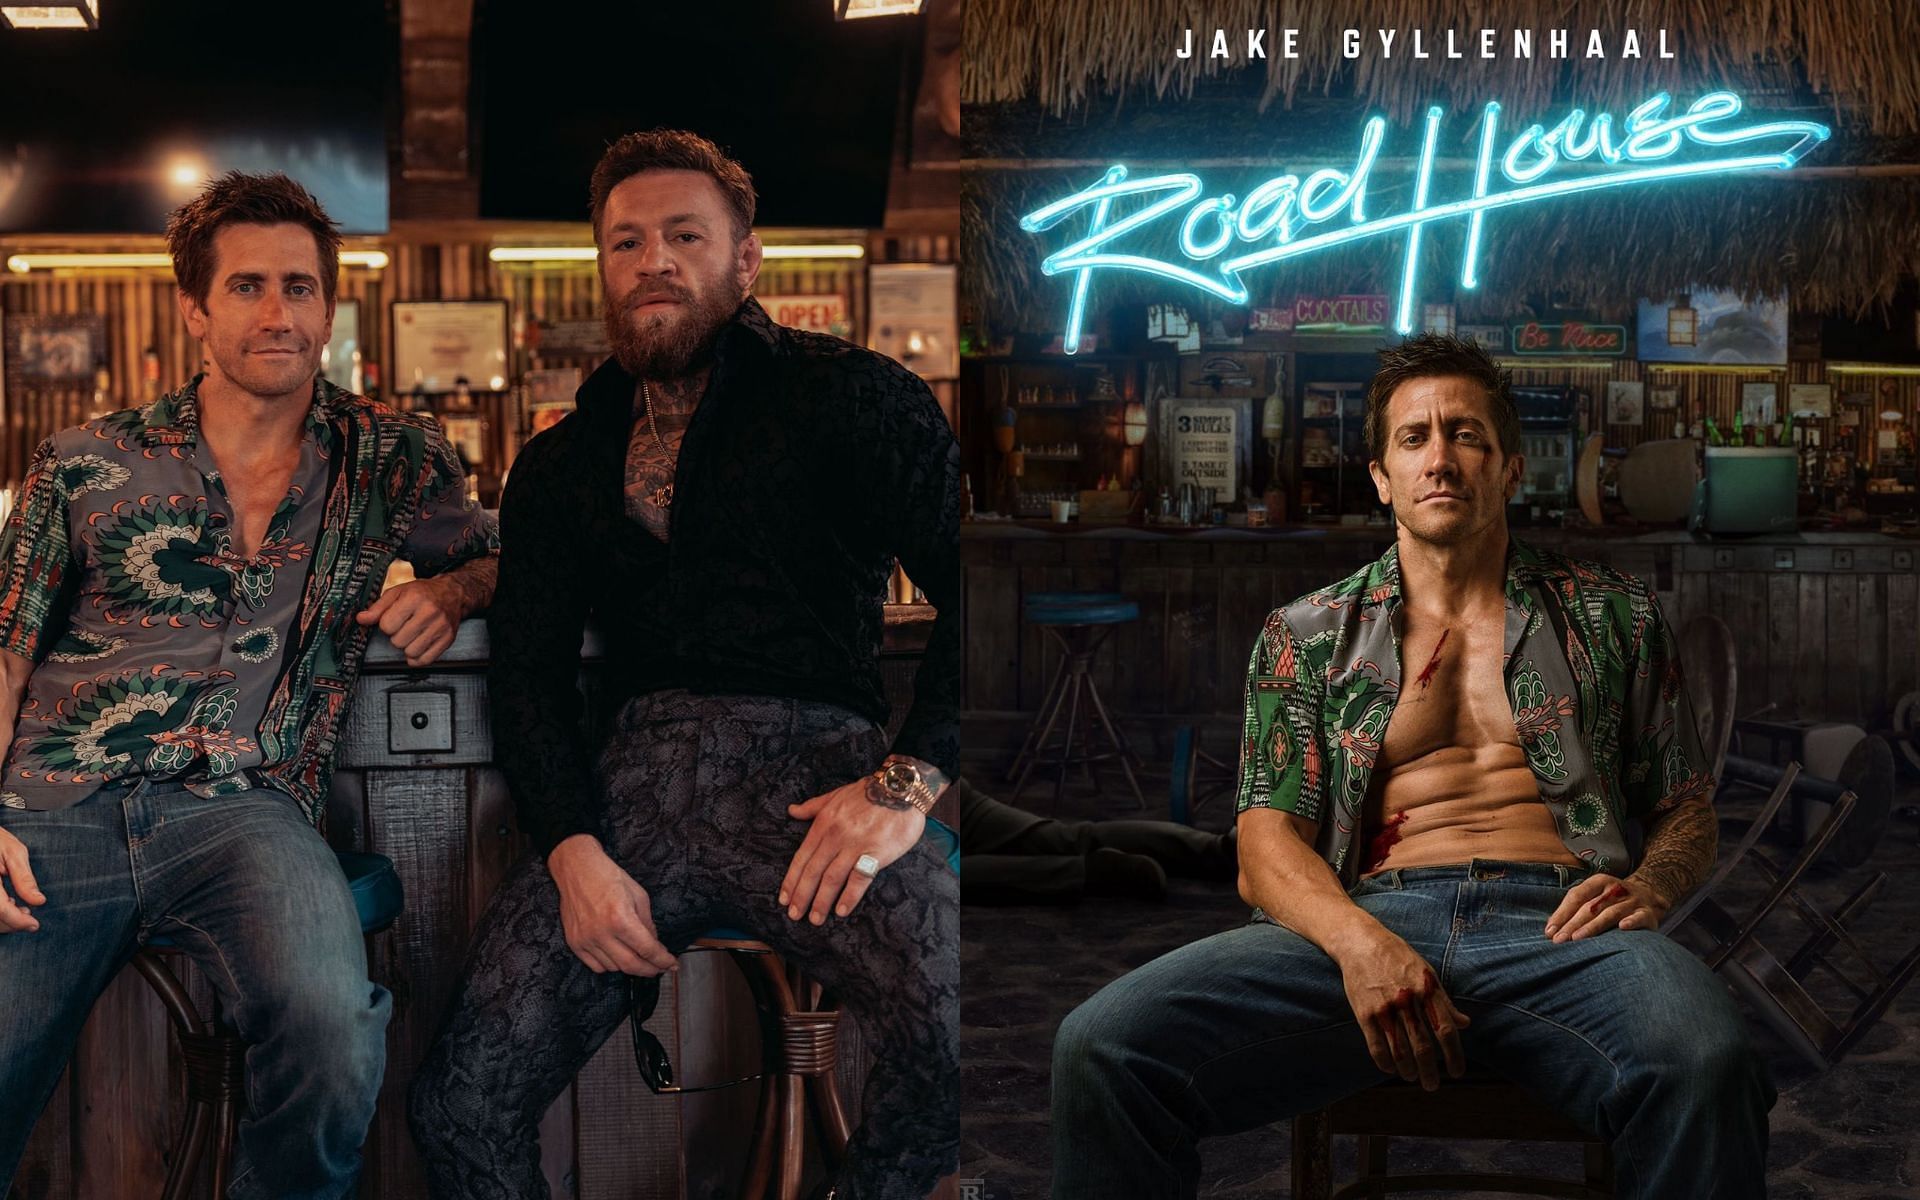 Jake Gyllenhaal and Conor McGregor set for the 